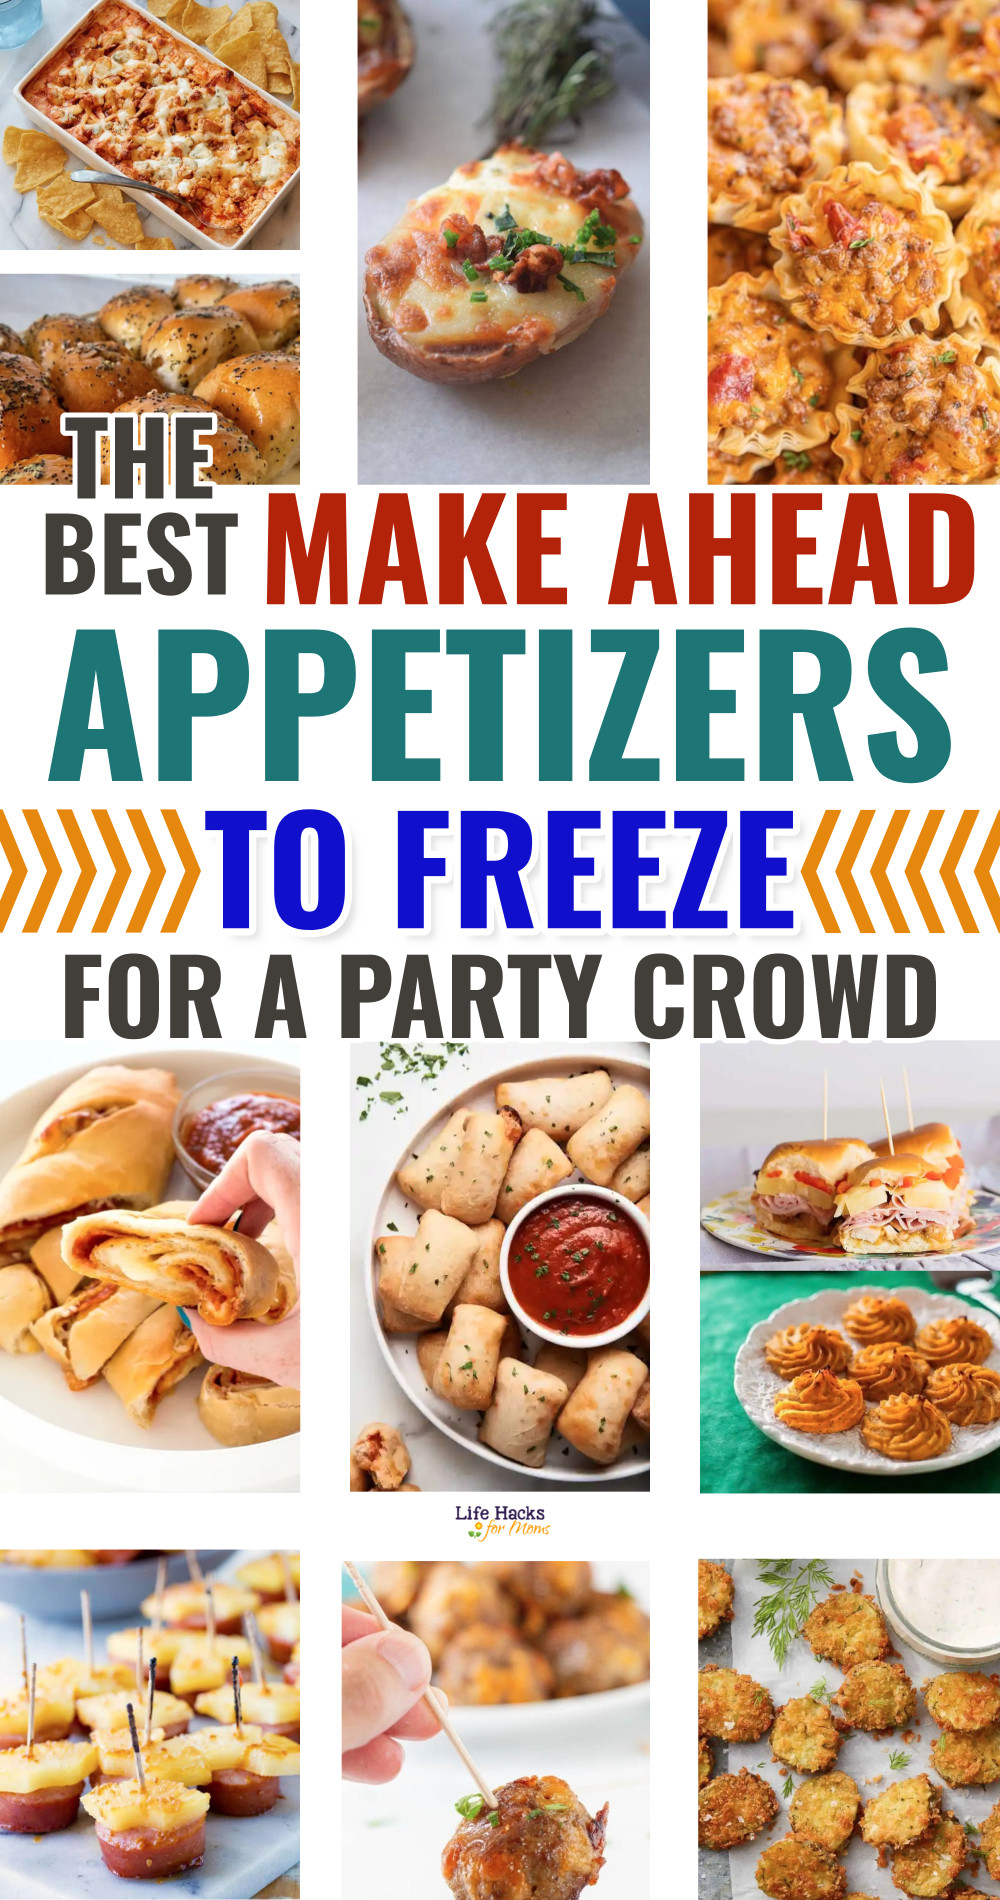 Make Ahead Appetizers To Freeze For A Party Crowd